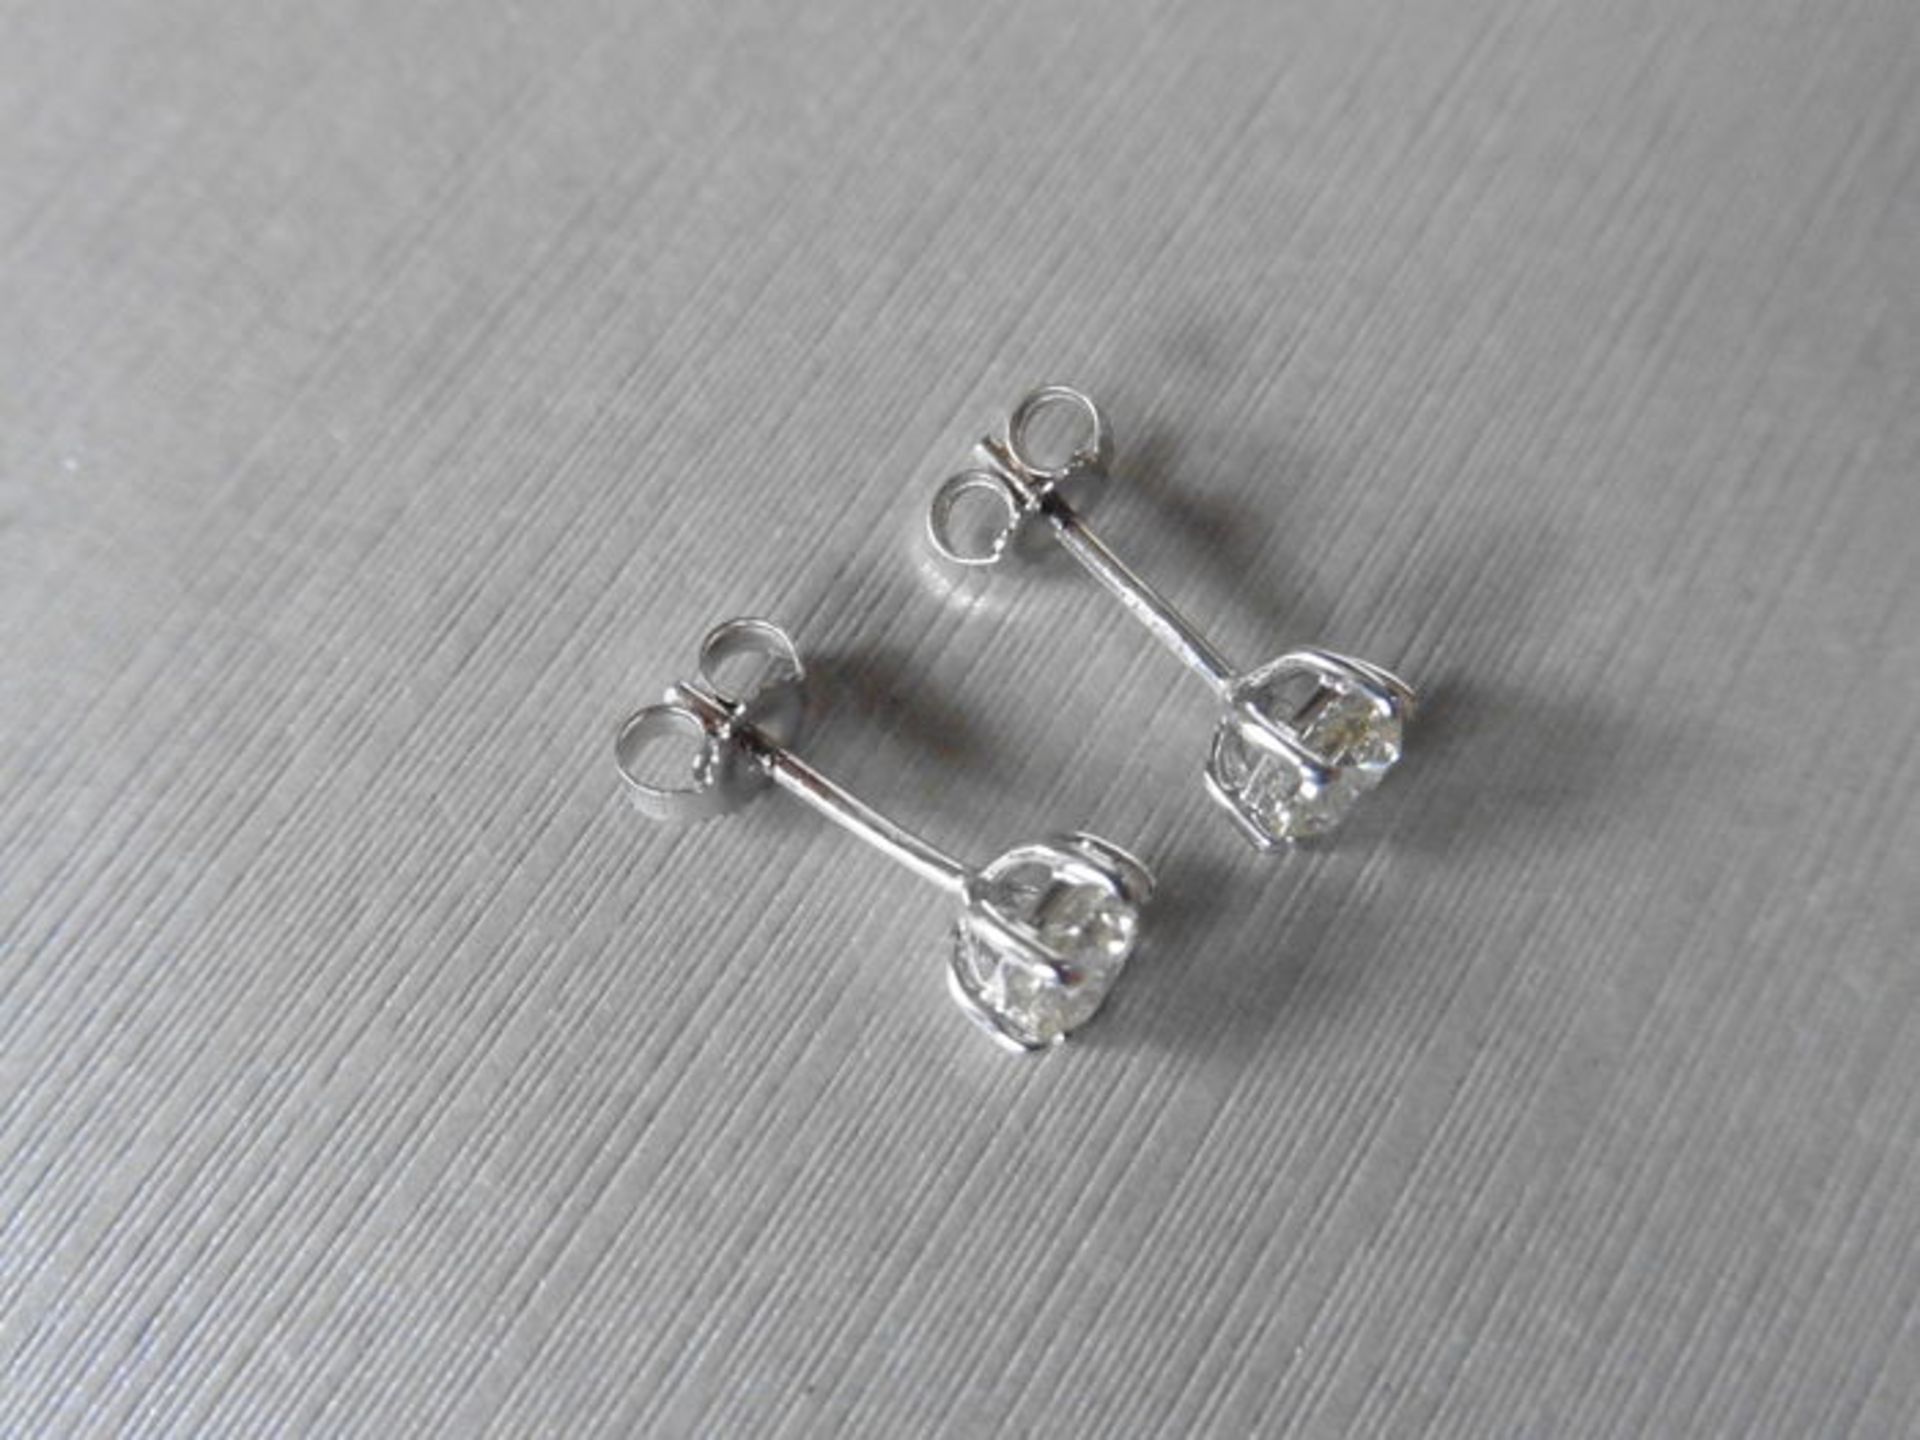 1.00ct Solitaire diamond stud earrings set with brilliant cut diamonds, SI3 clarity and H colour. - Image 2 of 2